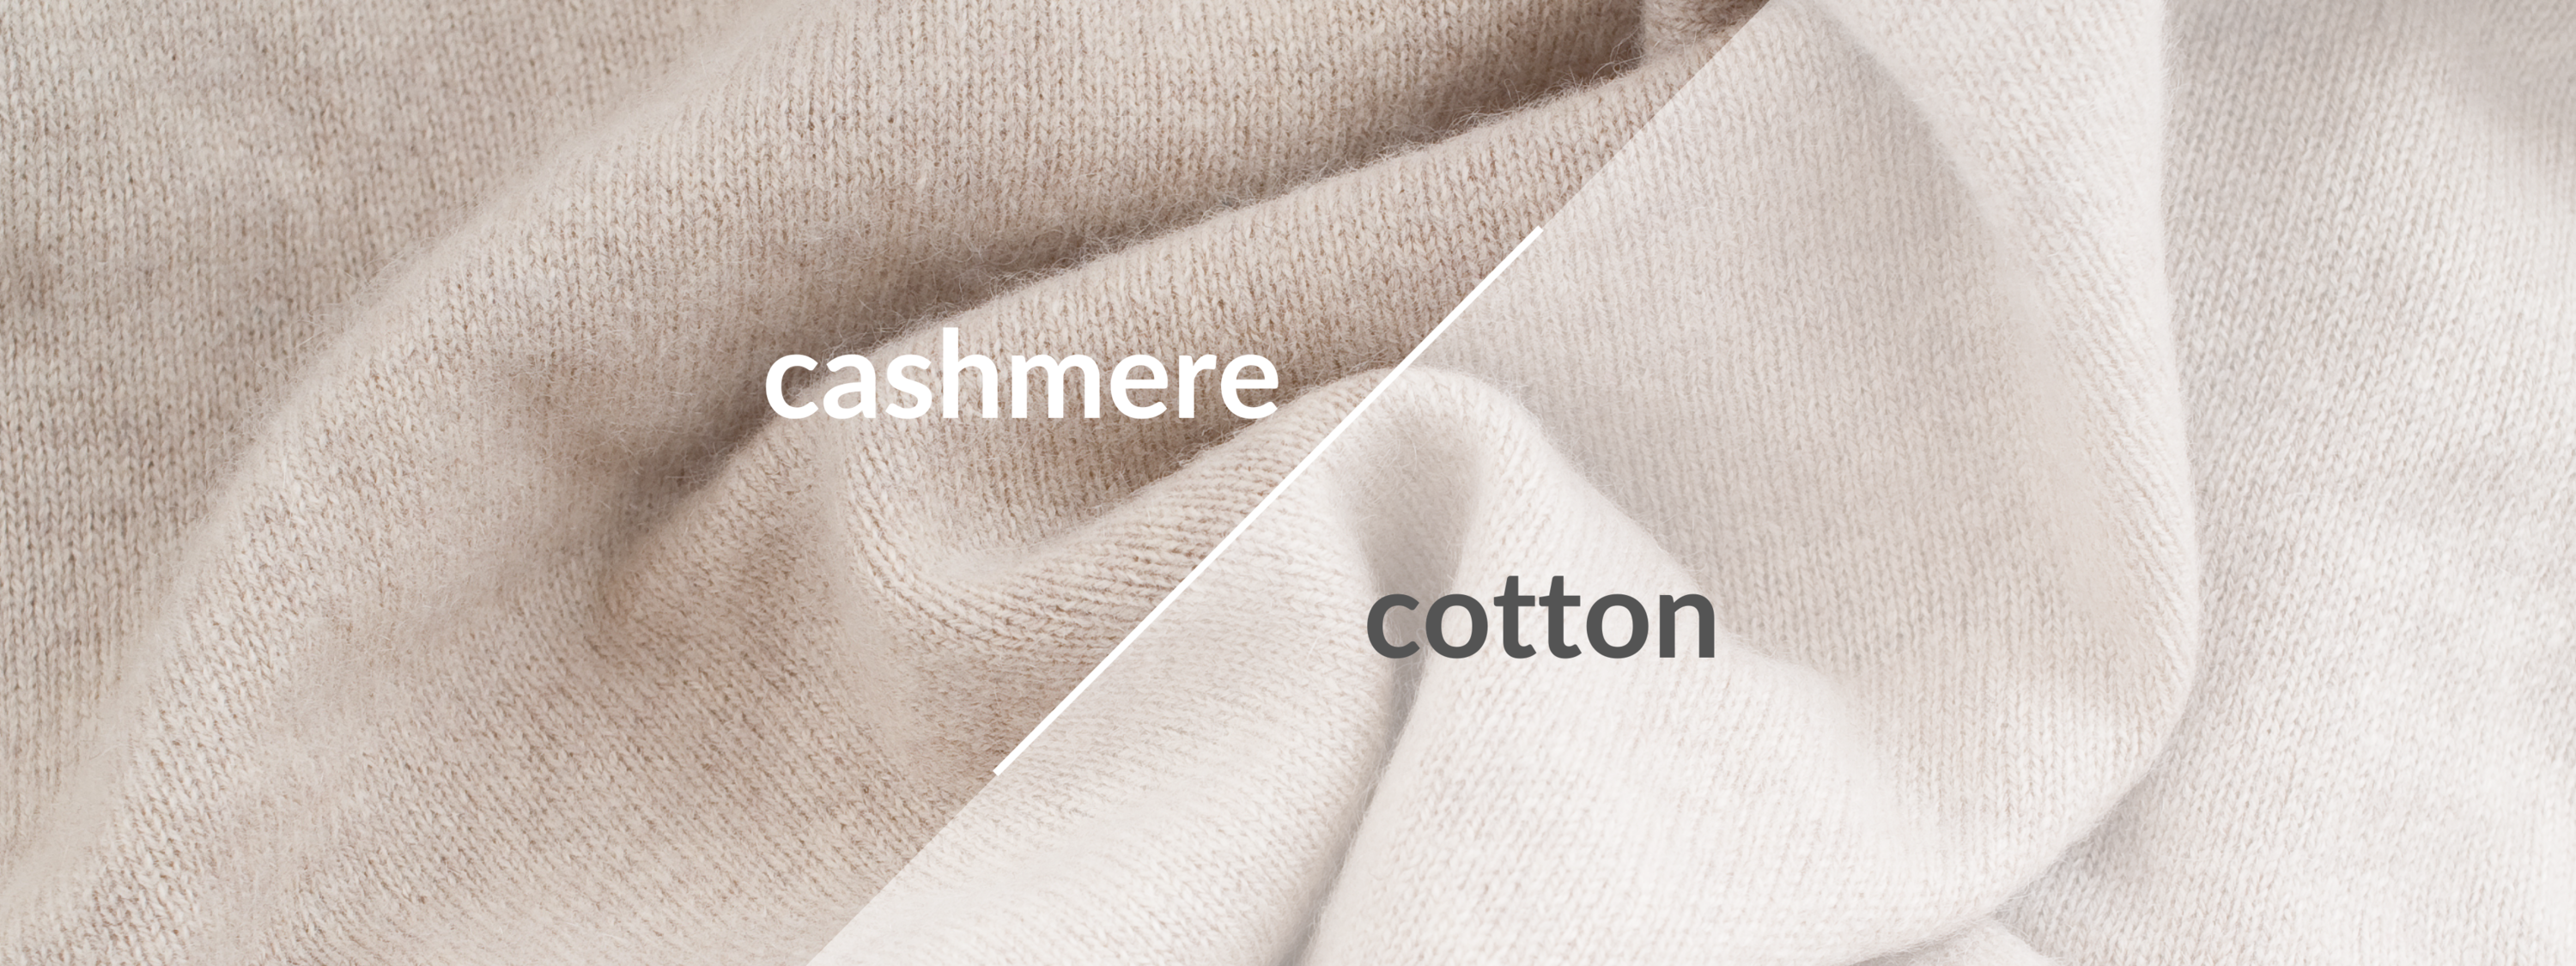 Cashmere vs. Cotton: Which is Best?